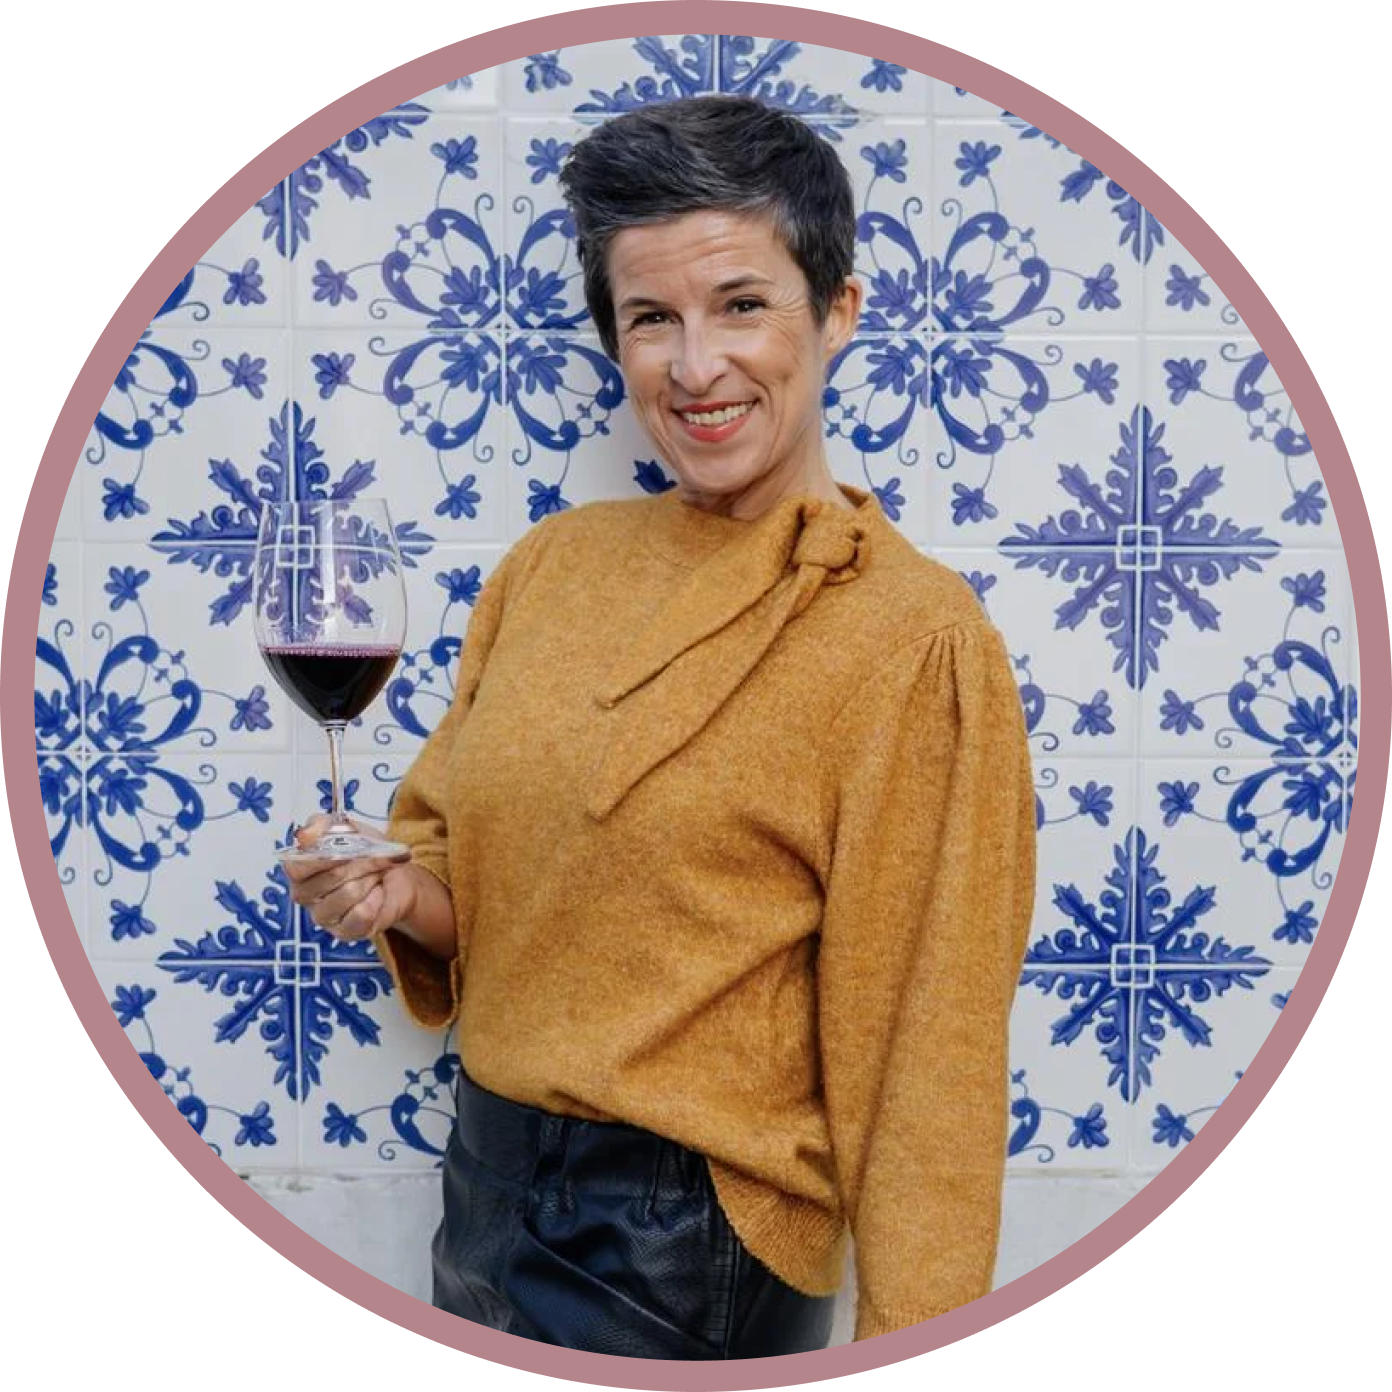 Portuguese sommelier Teresa Gomes smiling and holding a glass of wine, against a backdrop of traditional blue Portuguese tiles.